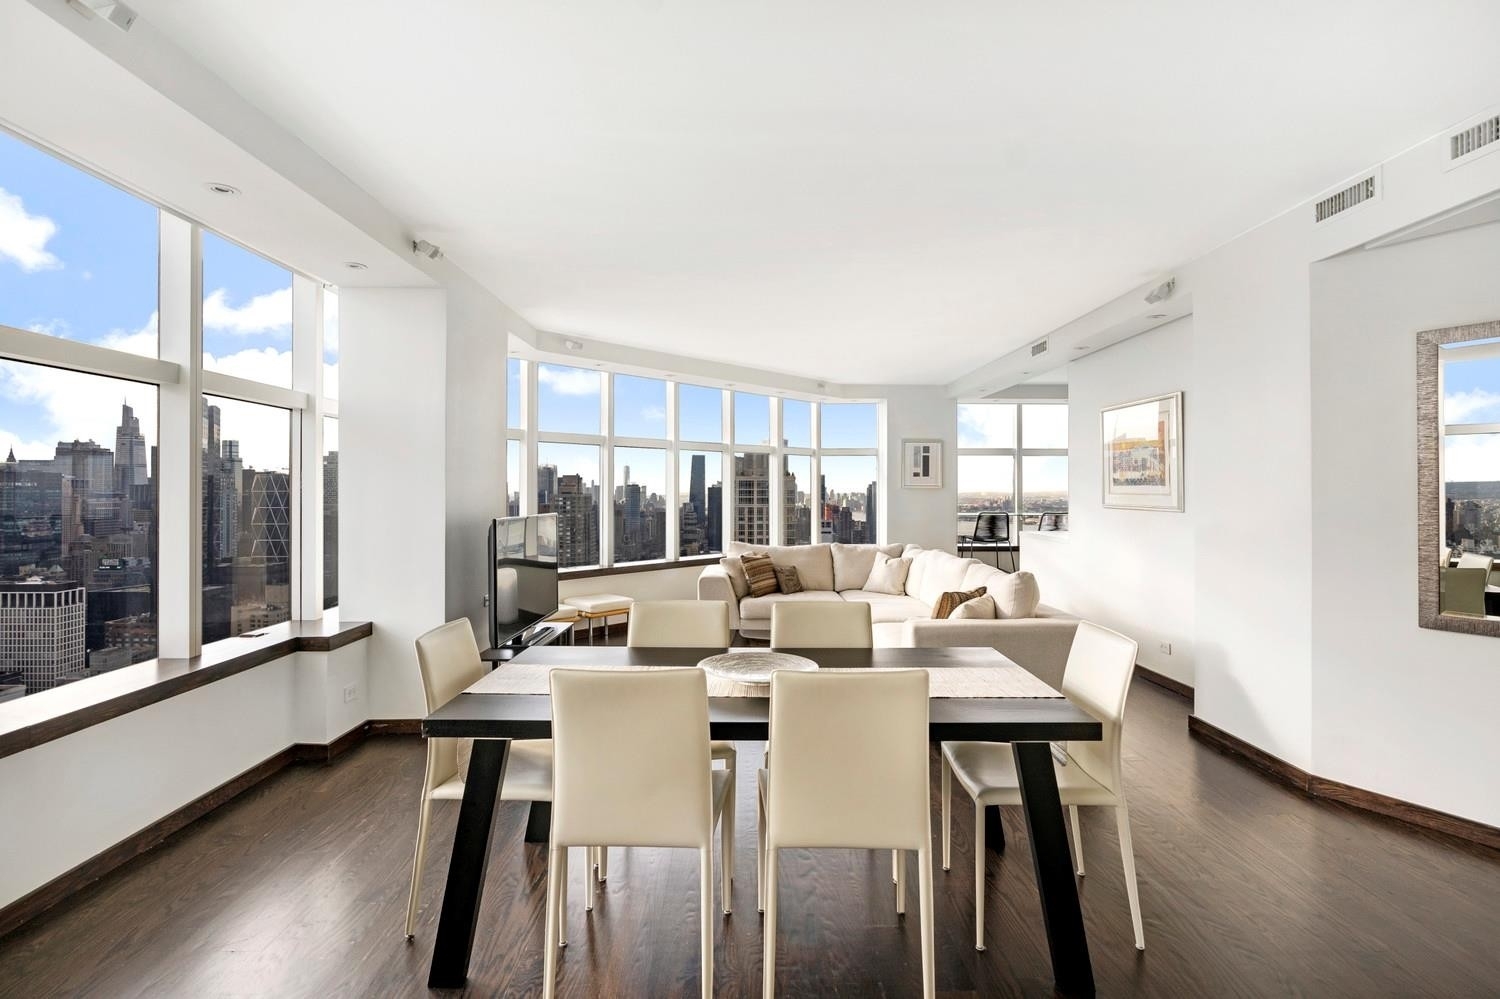 1. Condominiums for Sale at 3 Lincoln Center, 160 W 66TH ST, 59D Lincoln Square, New York, NY 10023